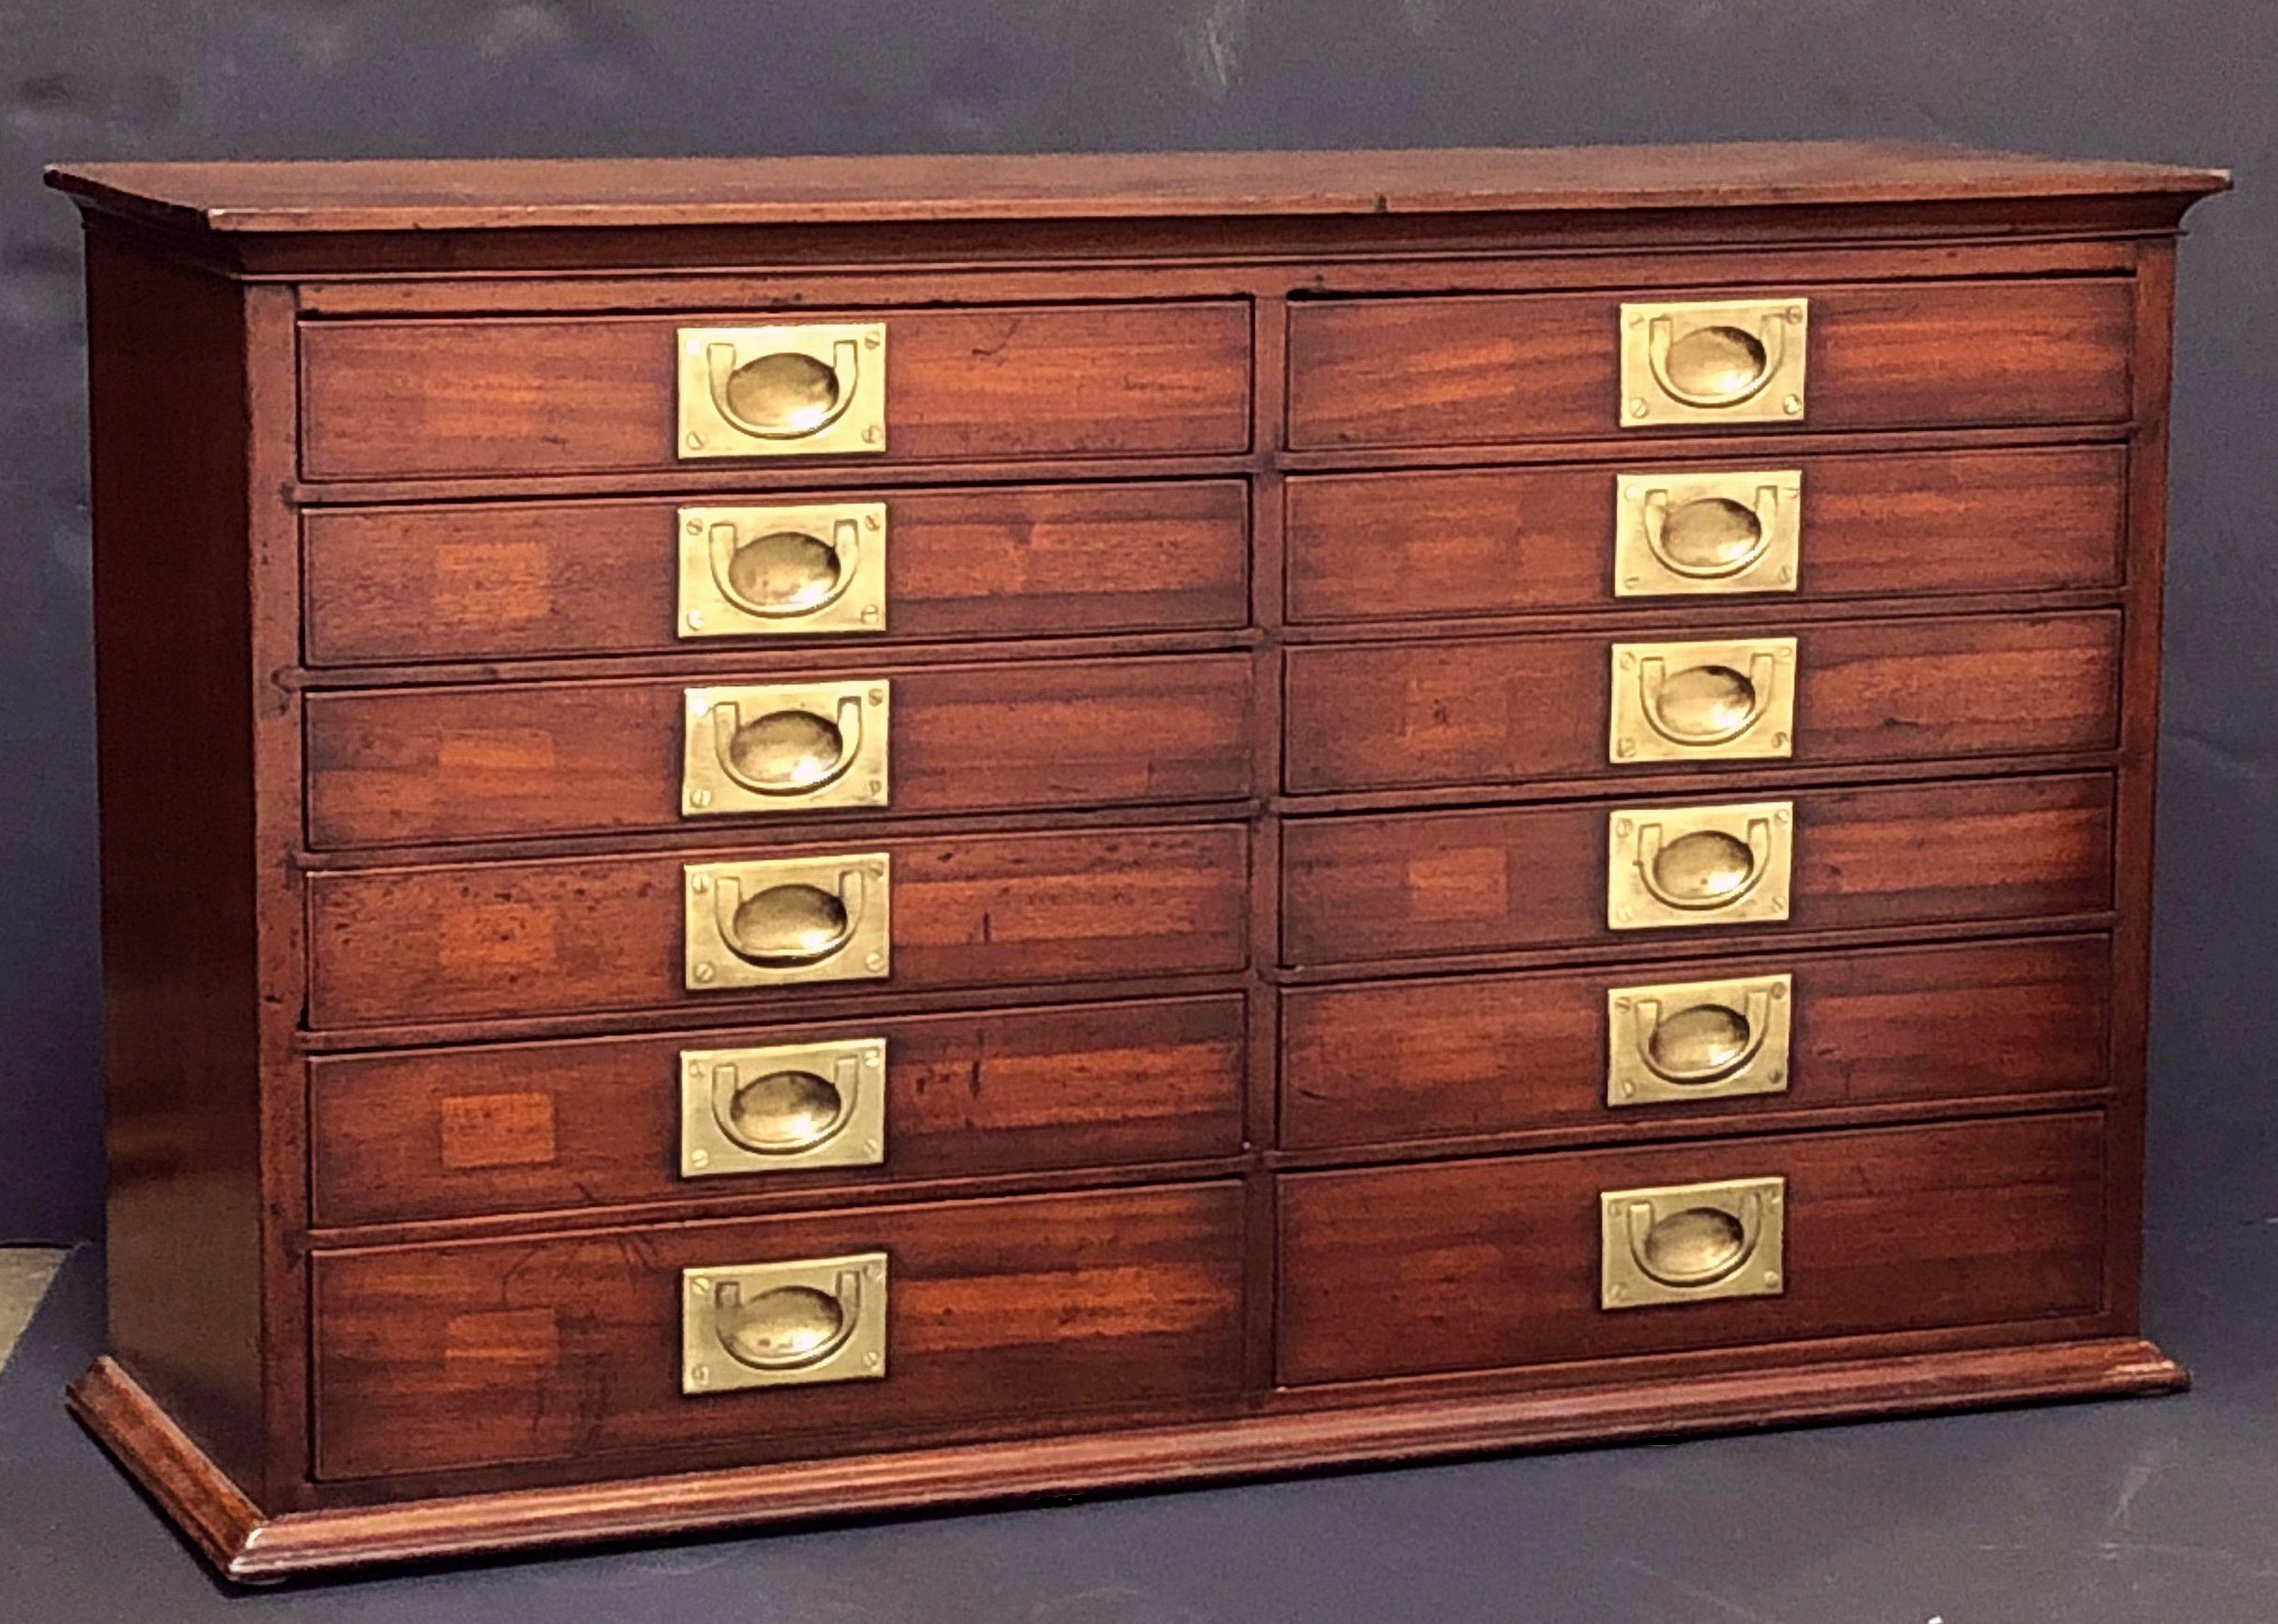 A handsome British military officer's Campaign rectangular flight or unit of drawers for the desk or table-top, of mahogany with brass hardware, featuring two rows of six drawers (twelve drawers total), each drawer with a recessed brass pull.

Note: